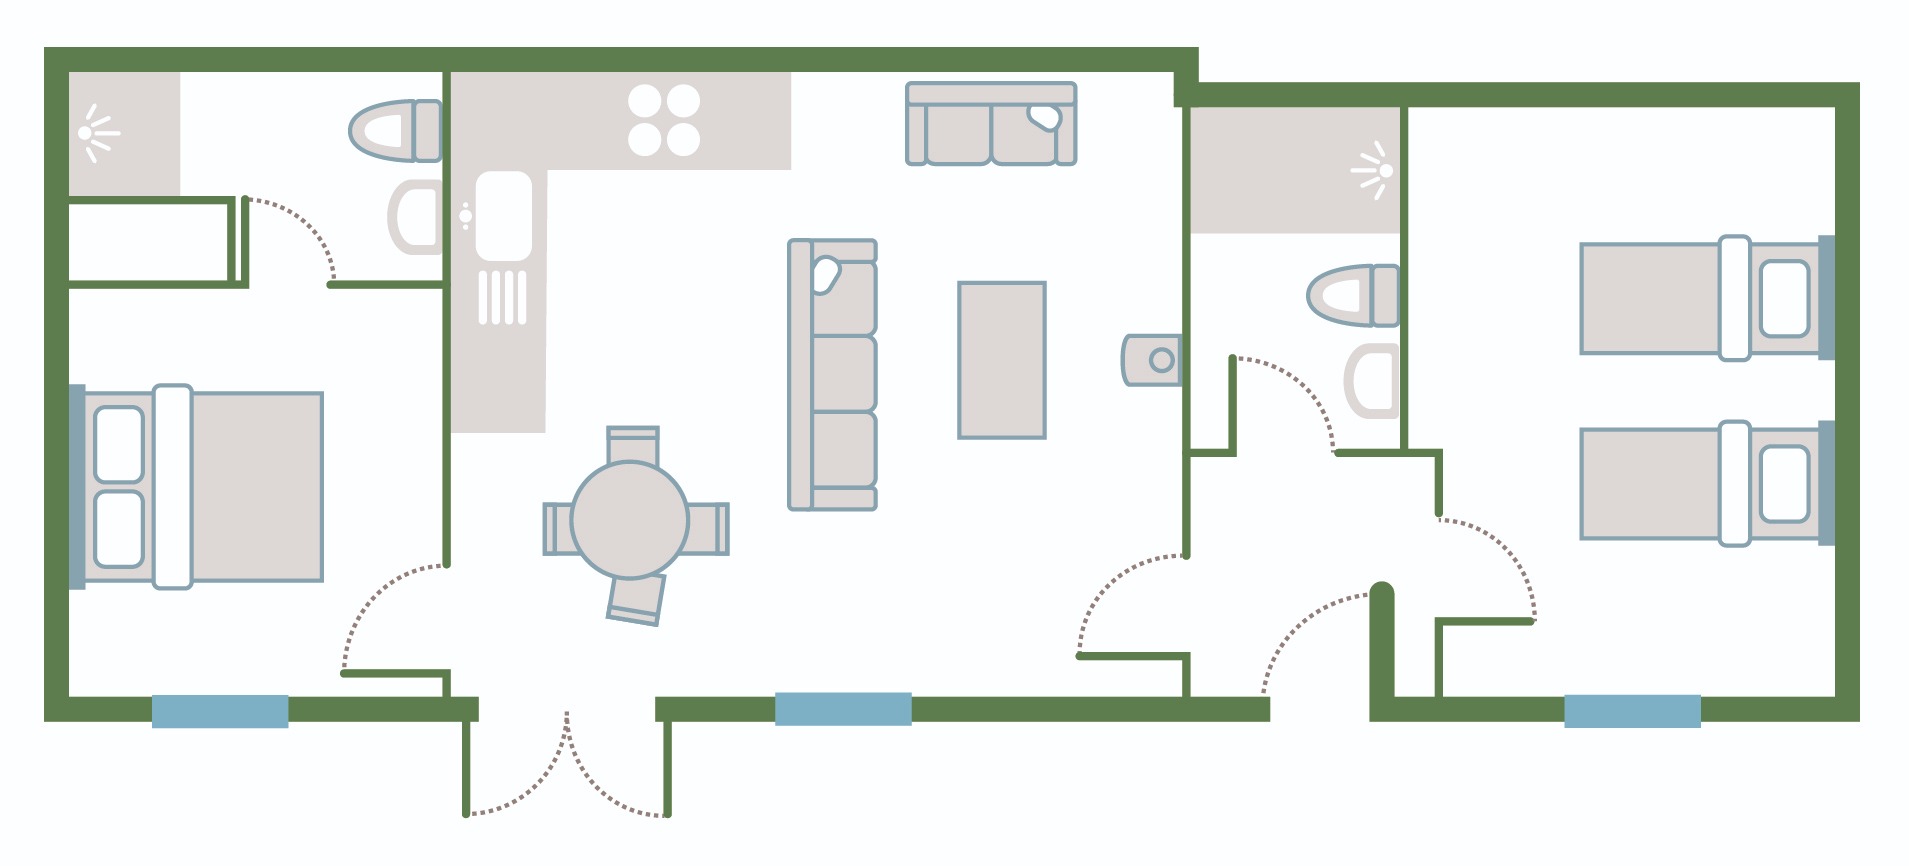 The Kennels Layout